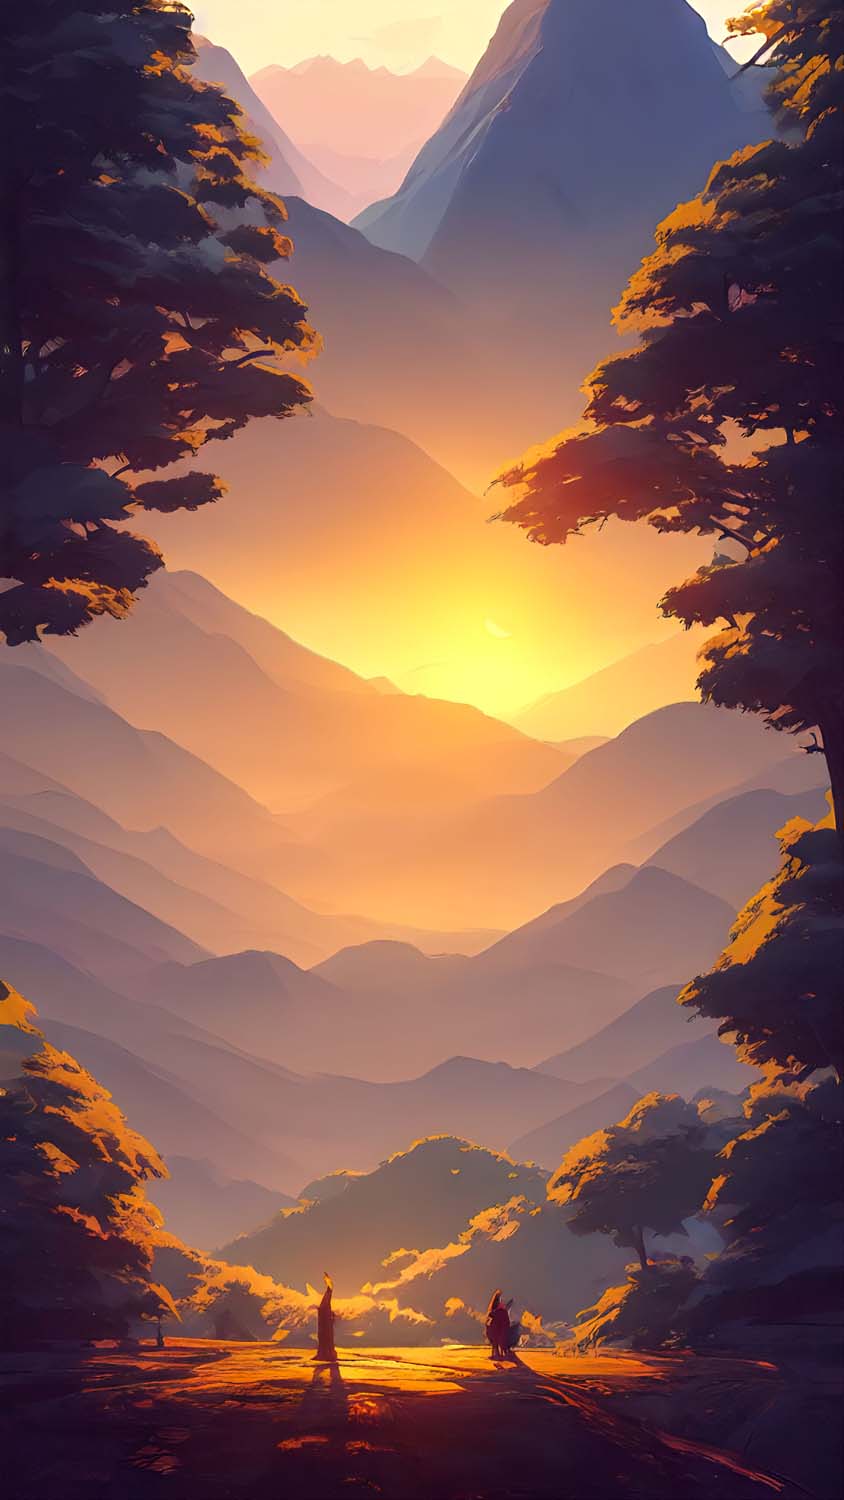 Sunshine From Mountains IPhone Wallpaper HD - IPhone Wallpapers : iPhone  Wallpapers